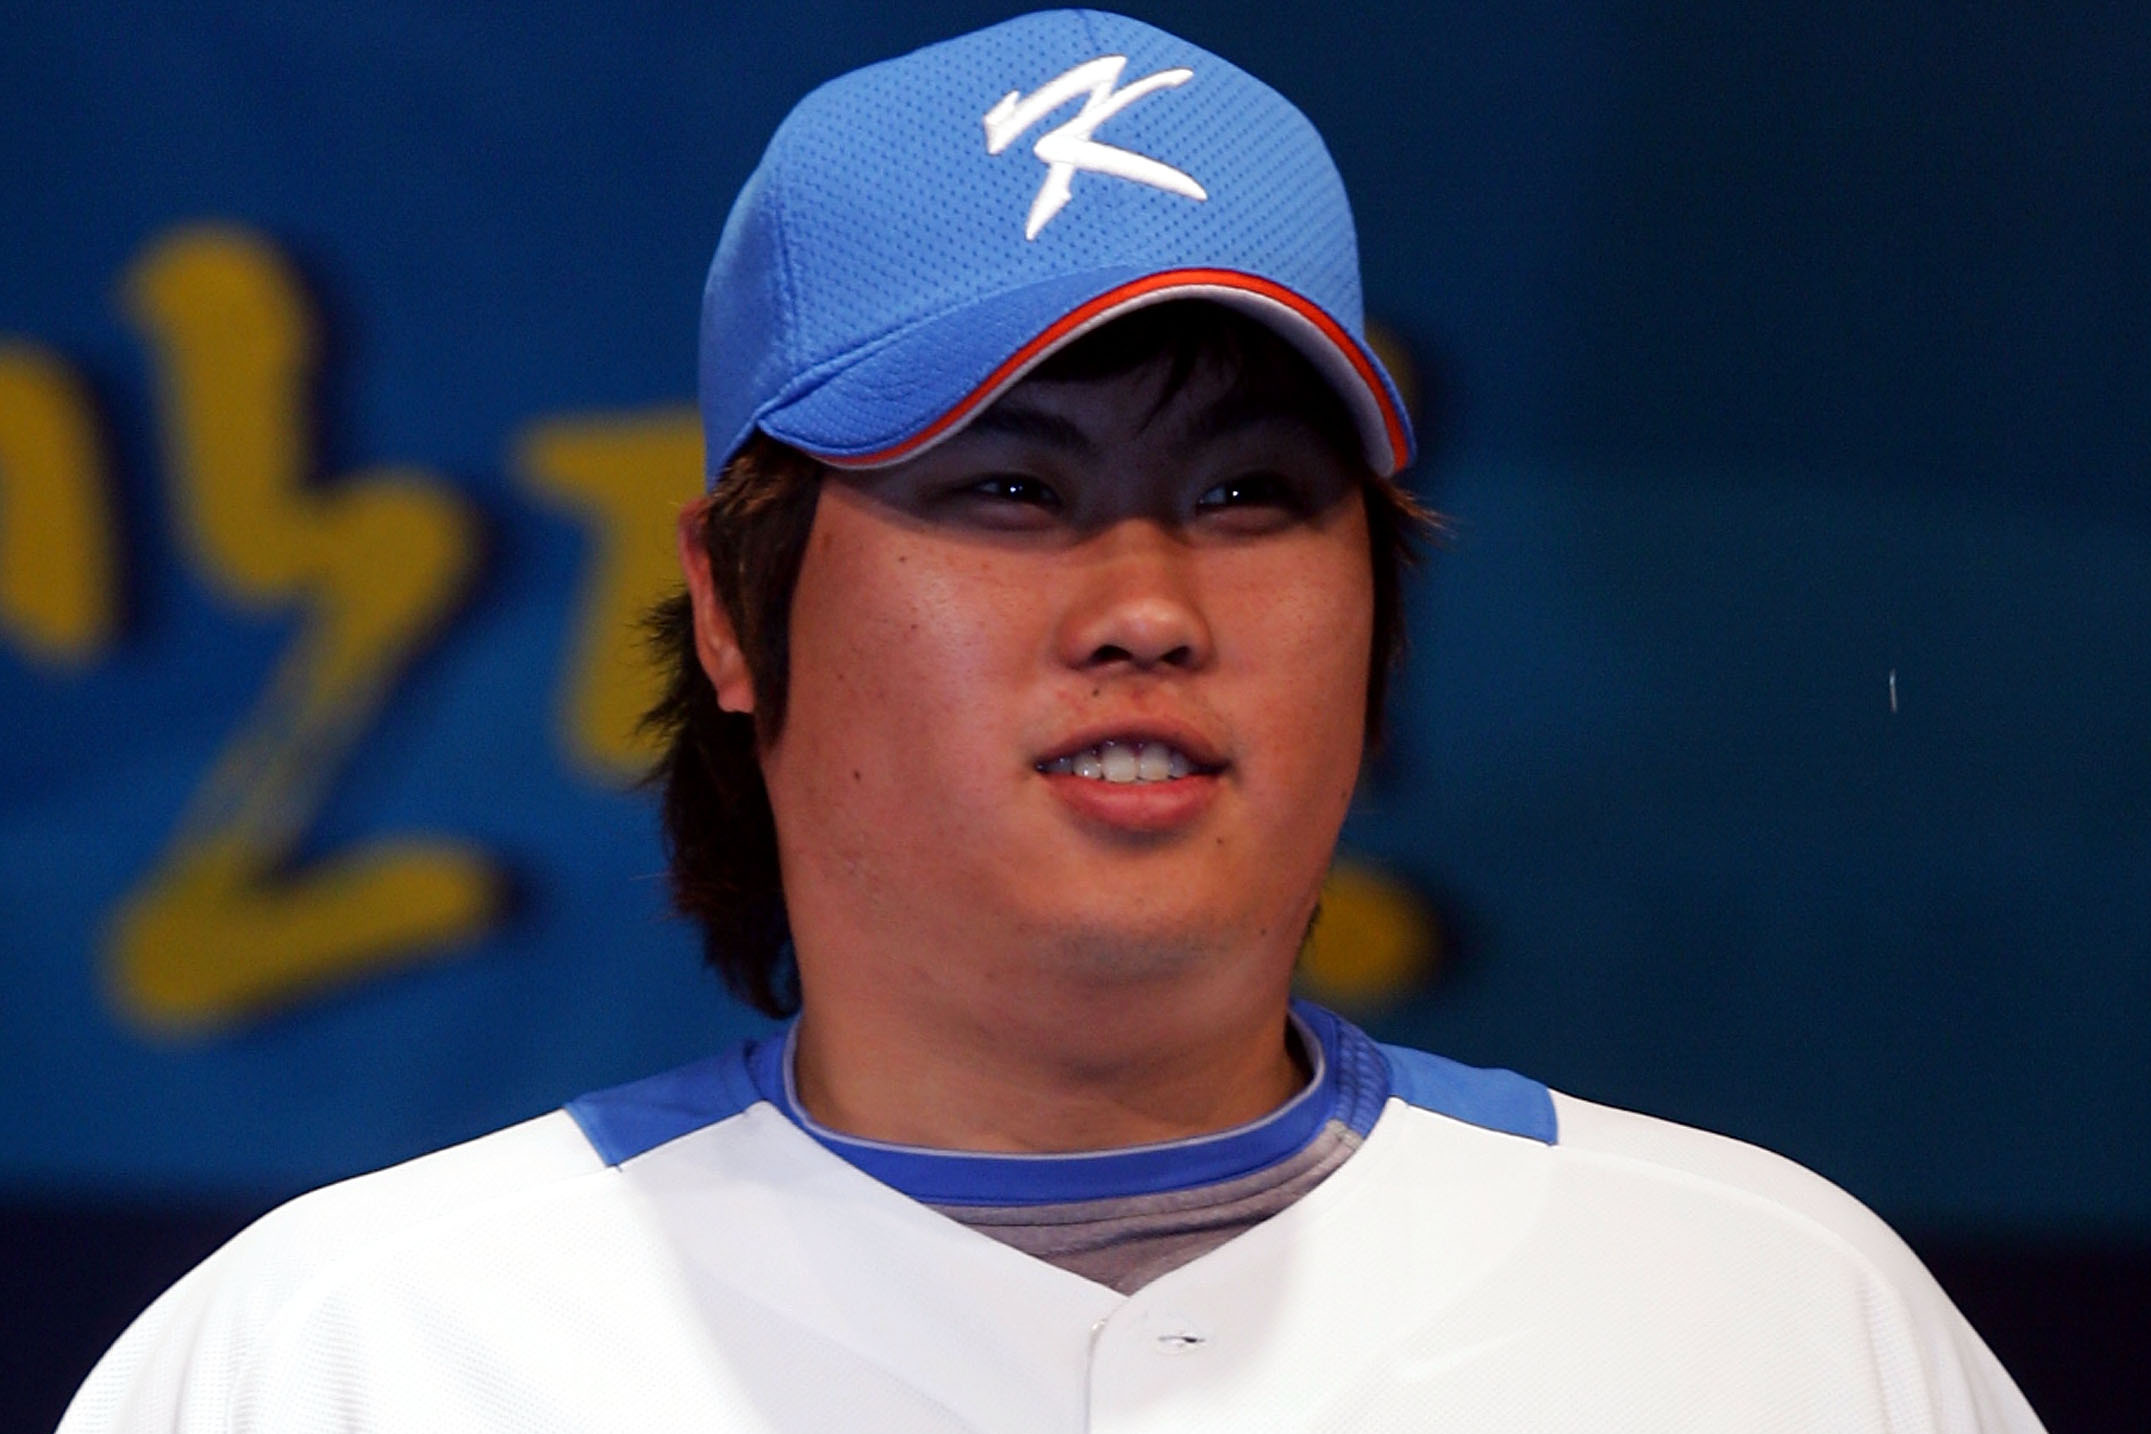 How Dodgers' Hyun-Jin Ryu rose from South Korea to MLB All-Star